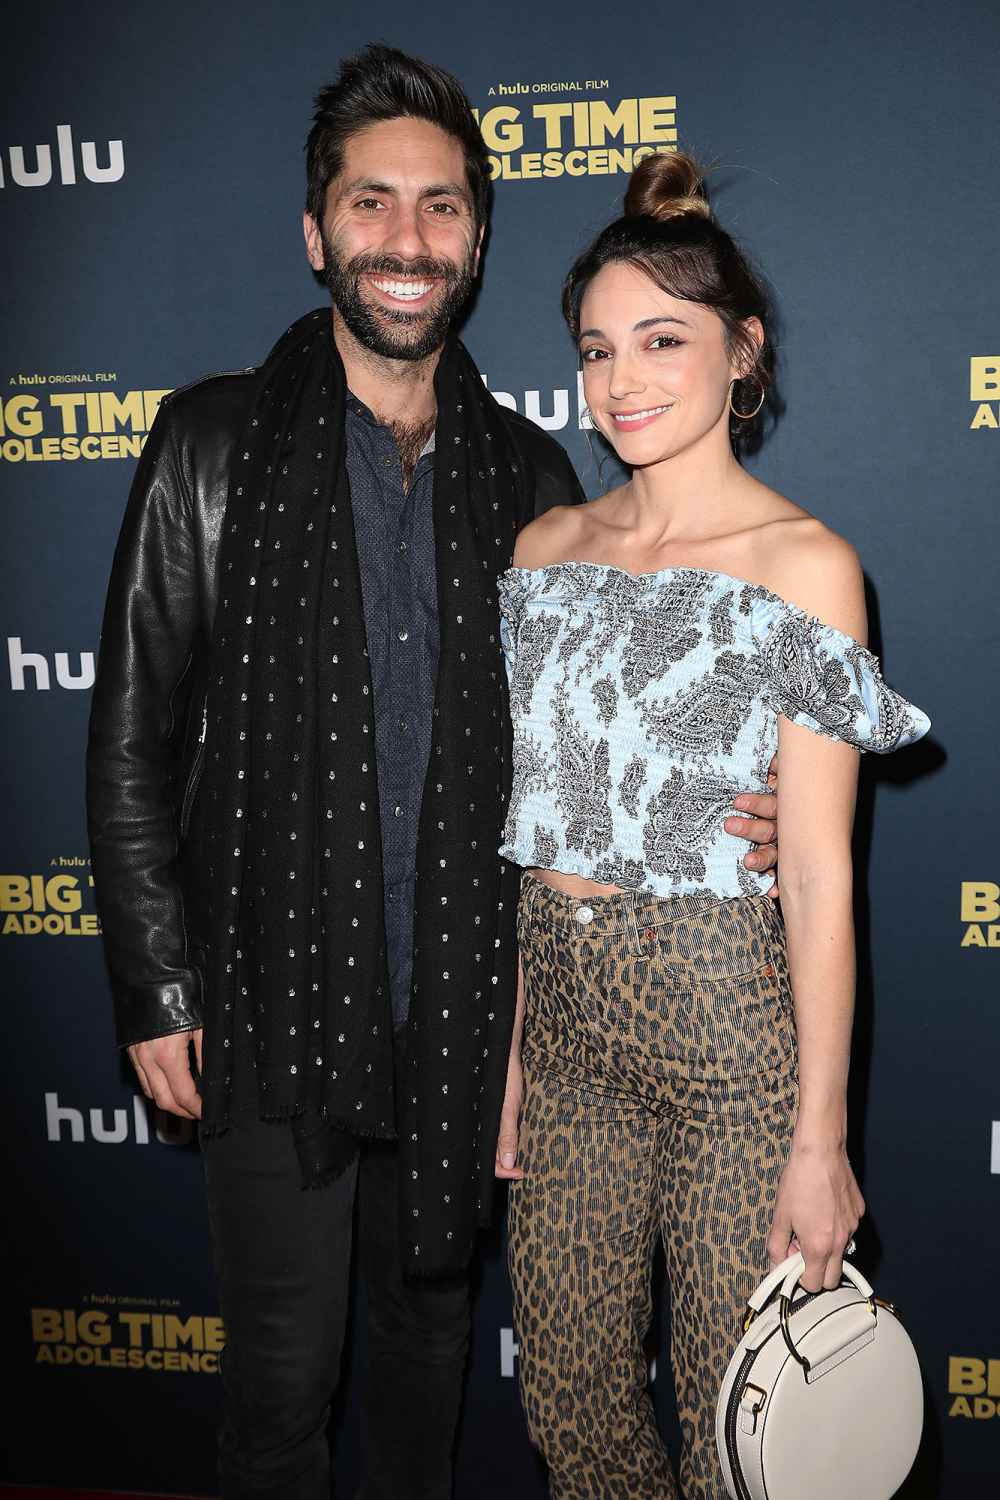 Nev Schulman and Laura Perlongo Hoping for Baby Number 3 After Dancing With the Stars